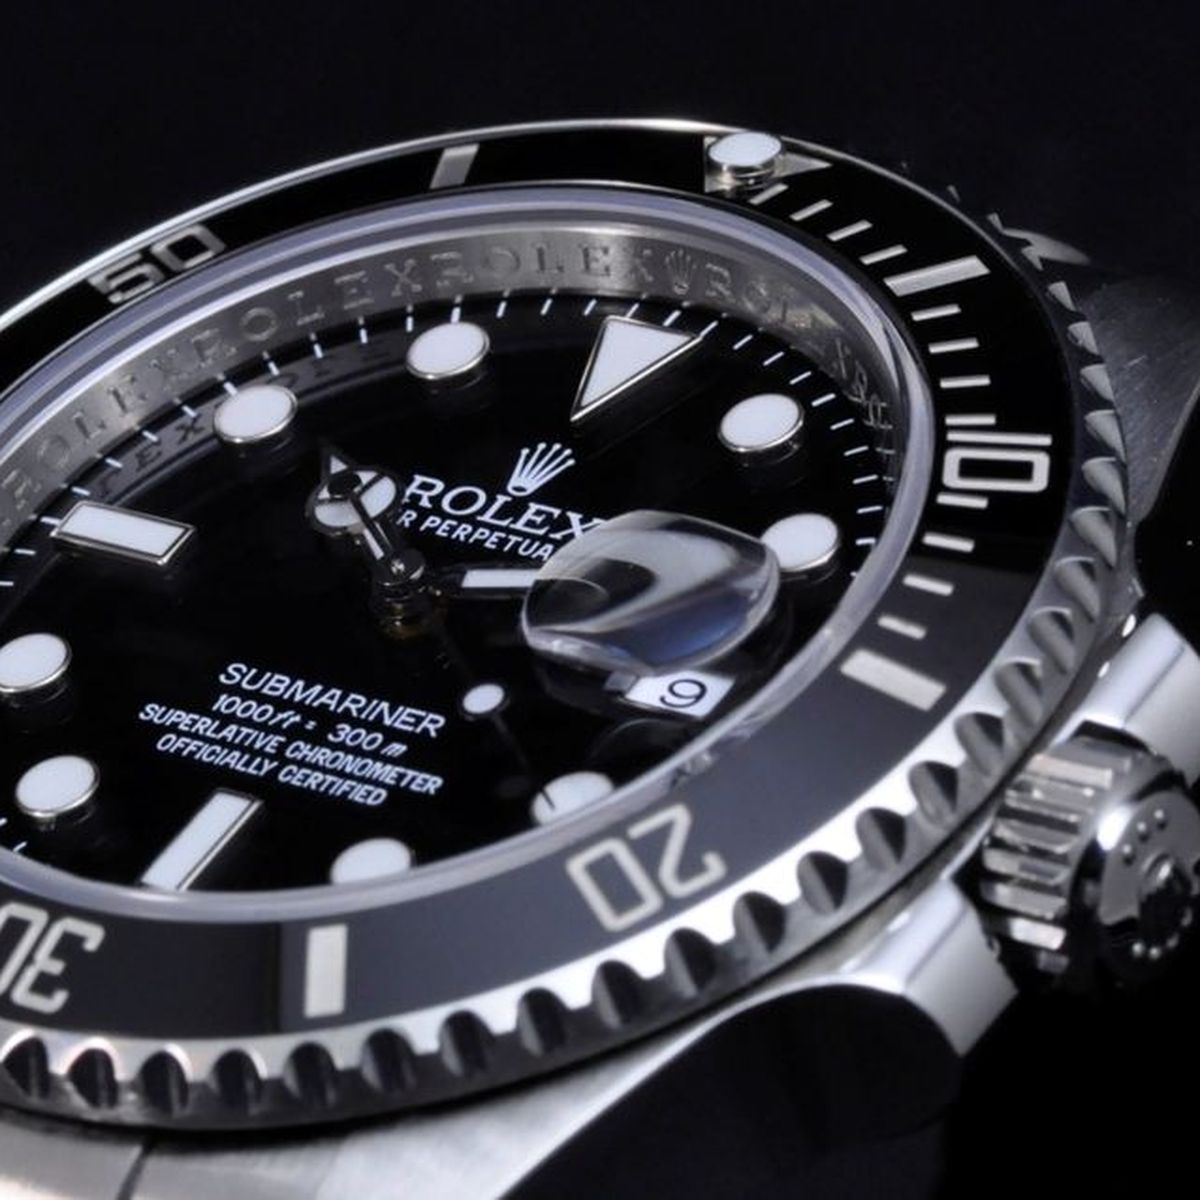 Servicing A Rolex: All You Need to Know